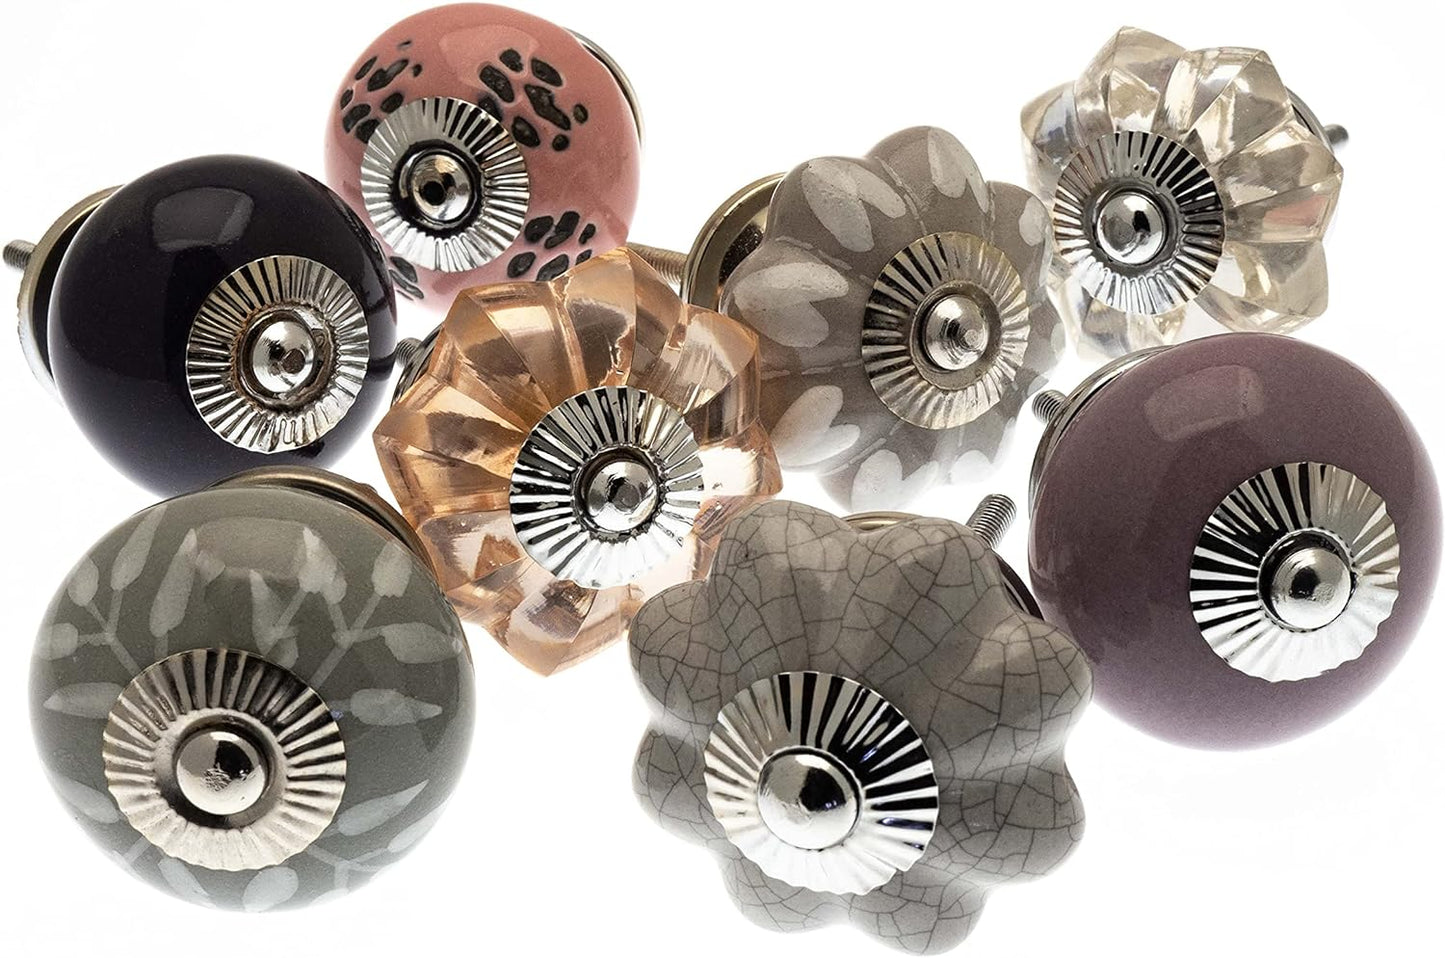 Glass and Ceramic Cupboard Door Knob Set of 8 in Neutral Shades of Antique Pinks and Gentle Grey Designs